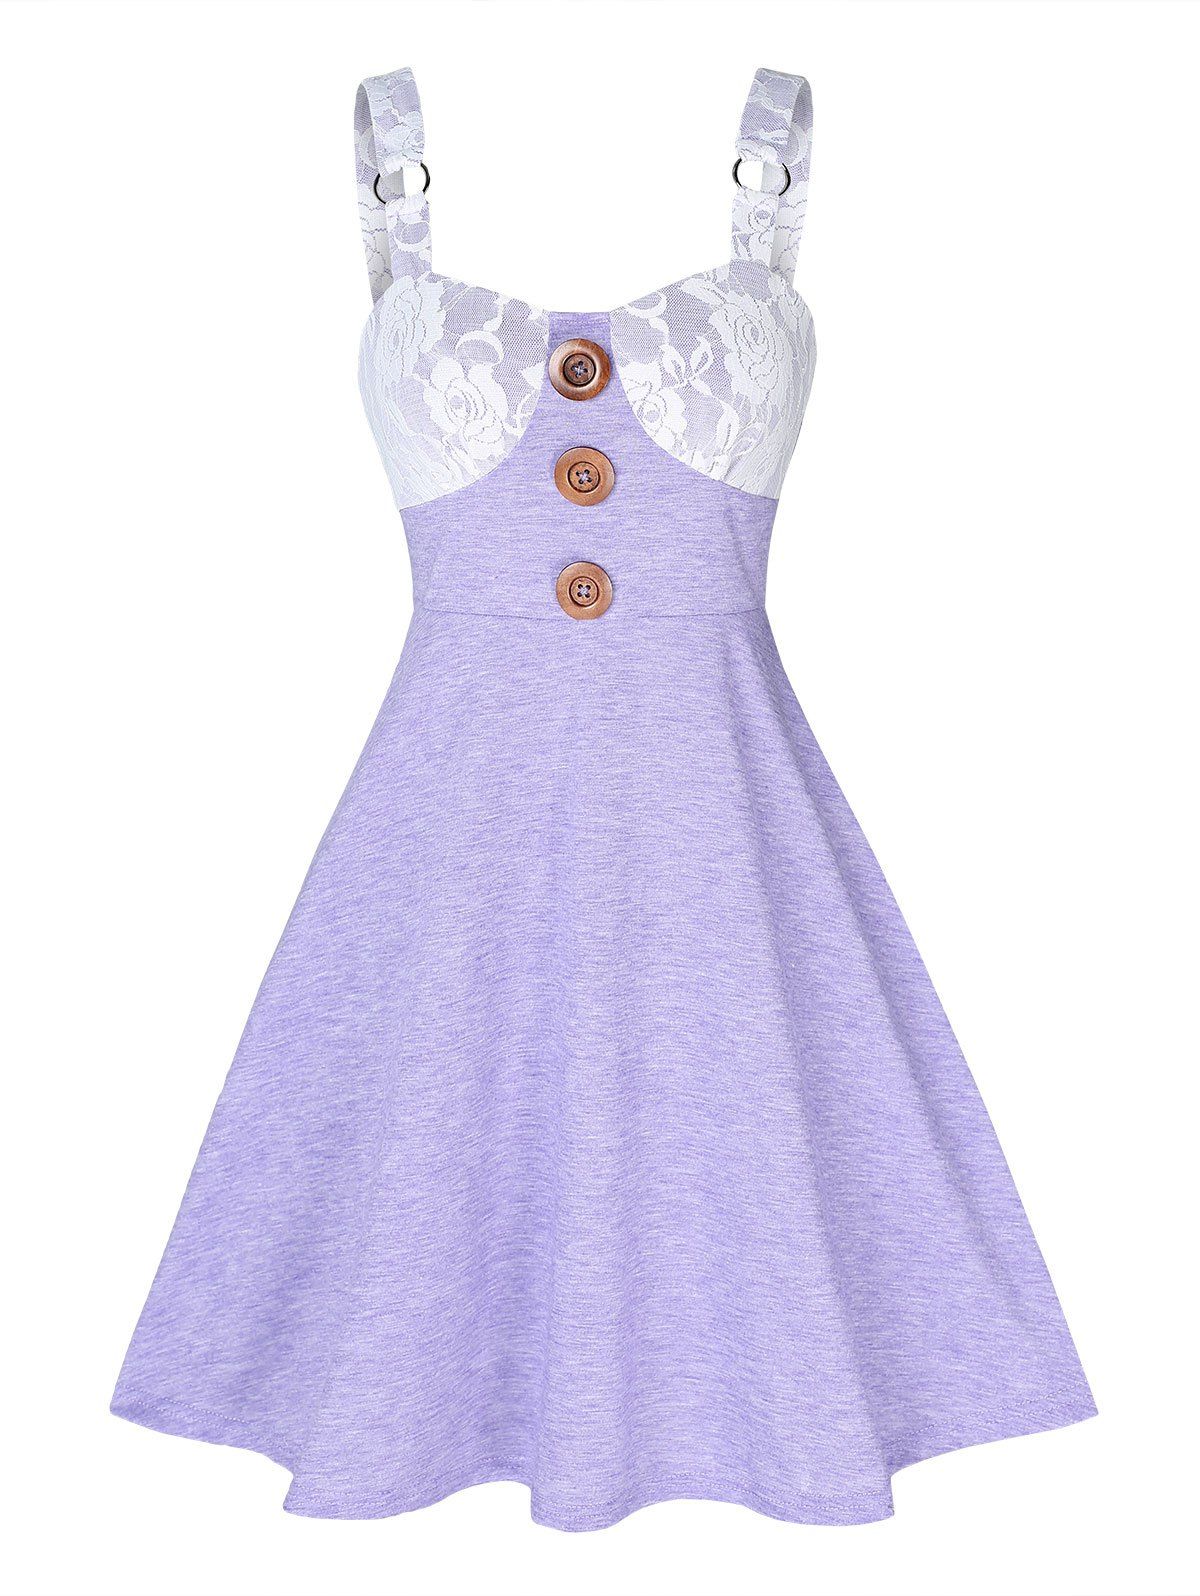 Lace Panel O Ring Fit and Flare Dress - LIGHT PURPLE XXXL